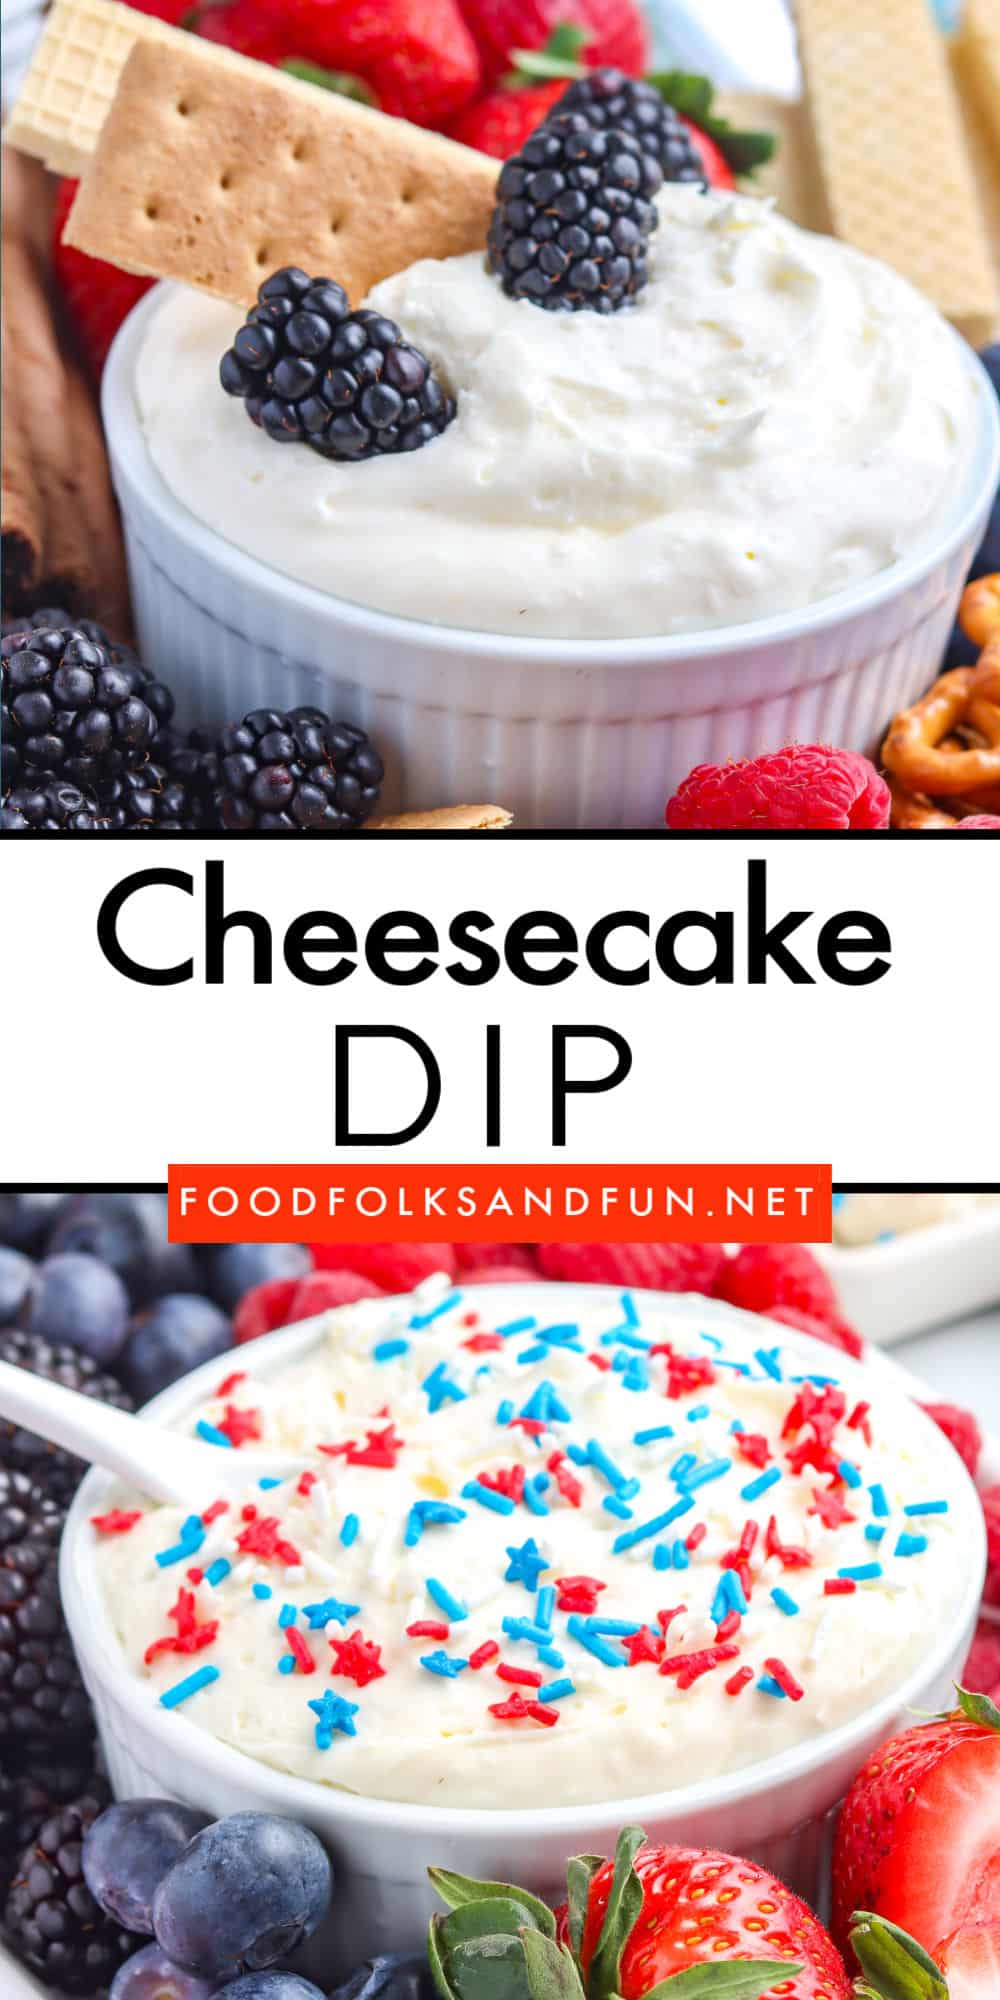 This cheesecake dip recipe is easy to make and comes together in 5-10 minutes! It’s a great dessert for parties, potlucks, and more. Just be careful: it’s super addicting!
 via @foodfolksandfun